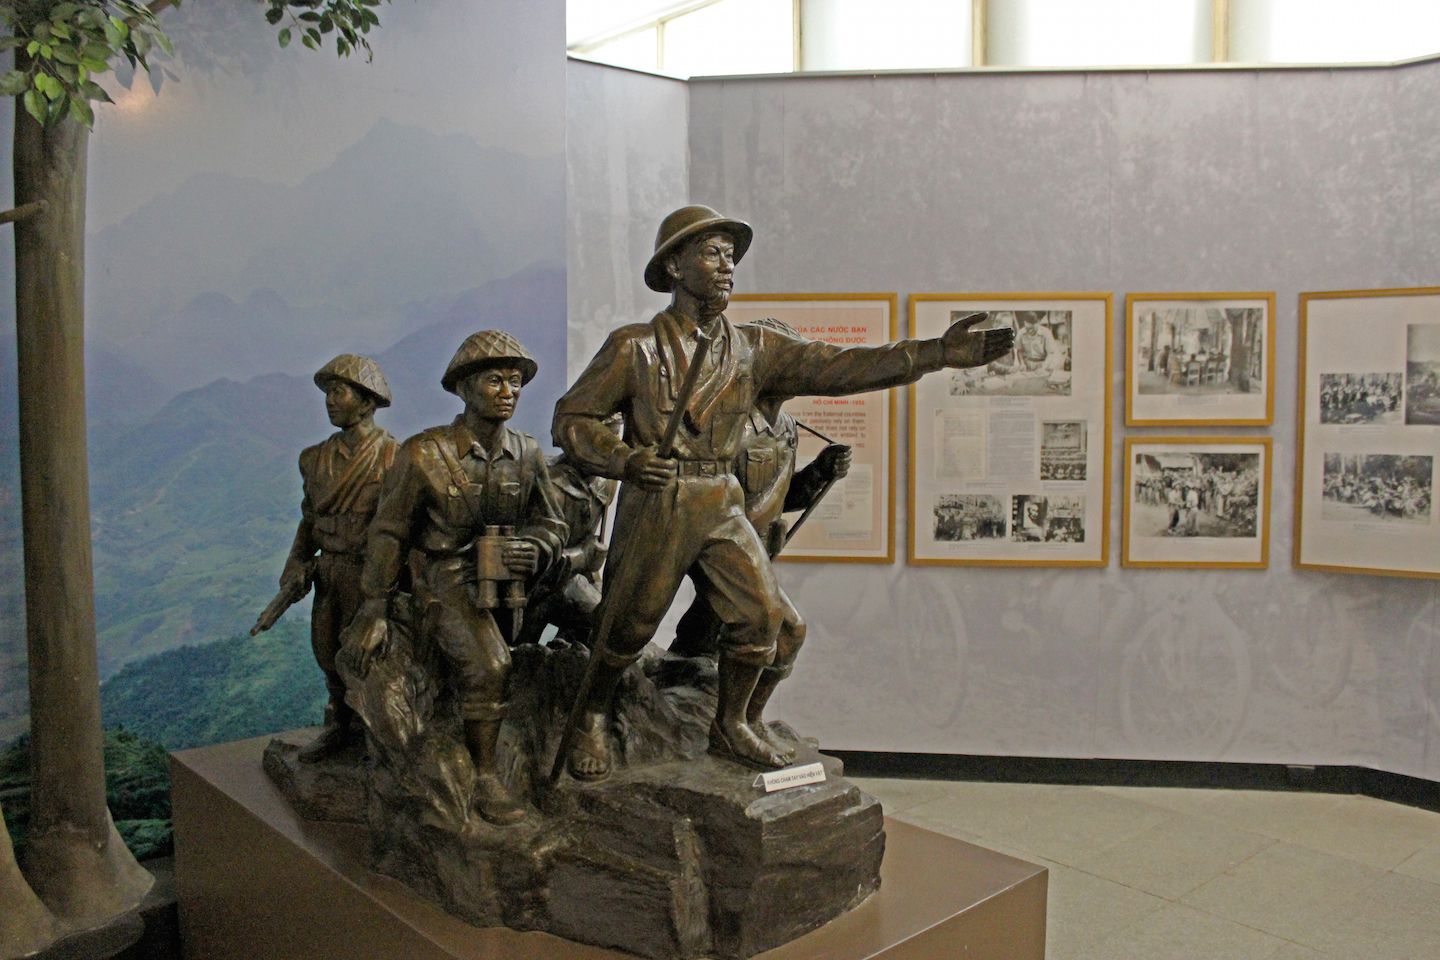 Ho Chi Minh leading the soldiers